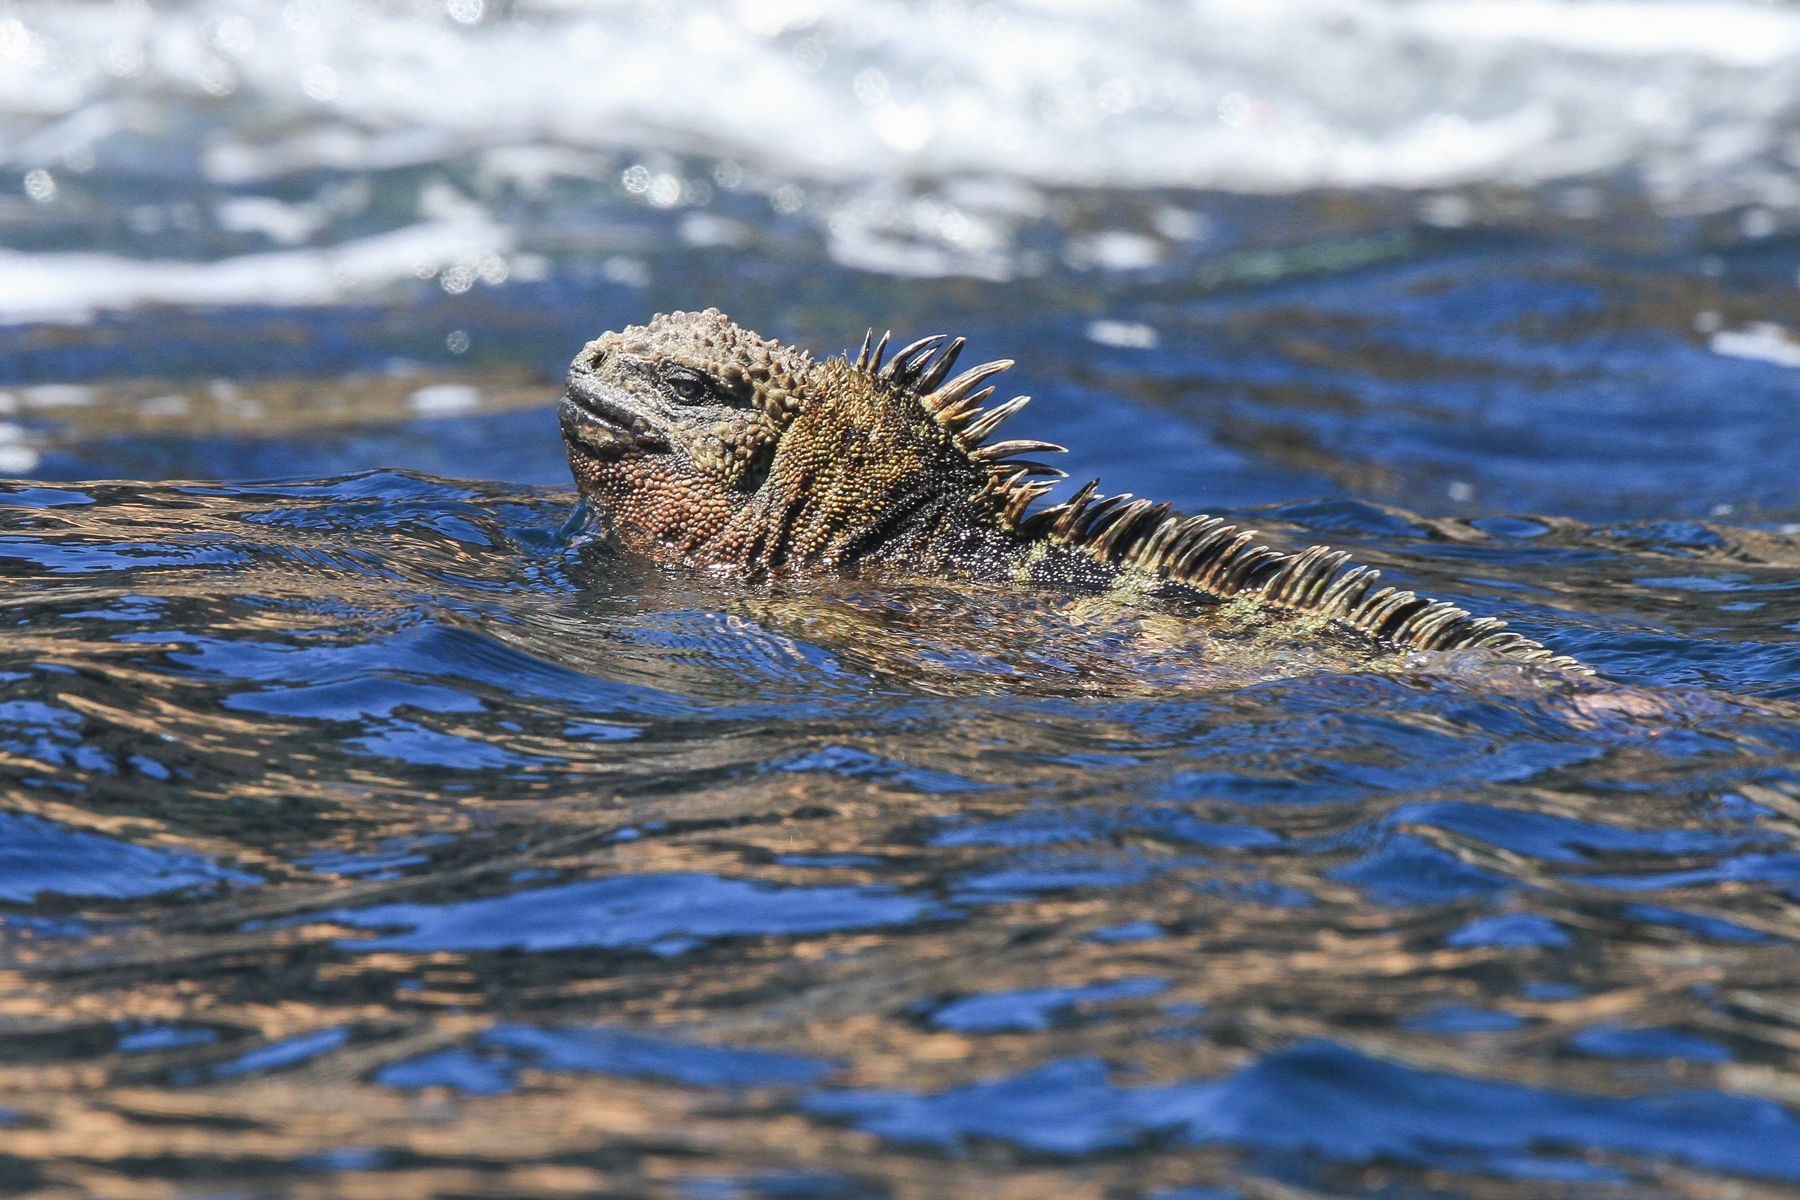 Marine Iguanas swim as well as any fish, diving to the bottom to feed on algae